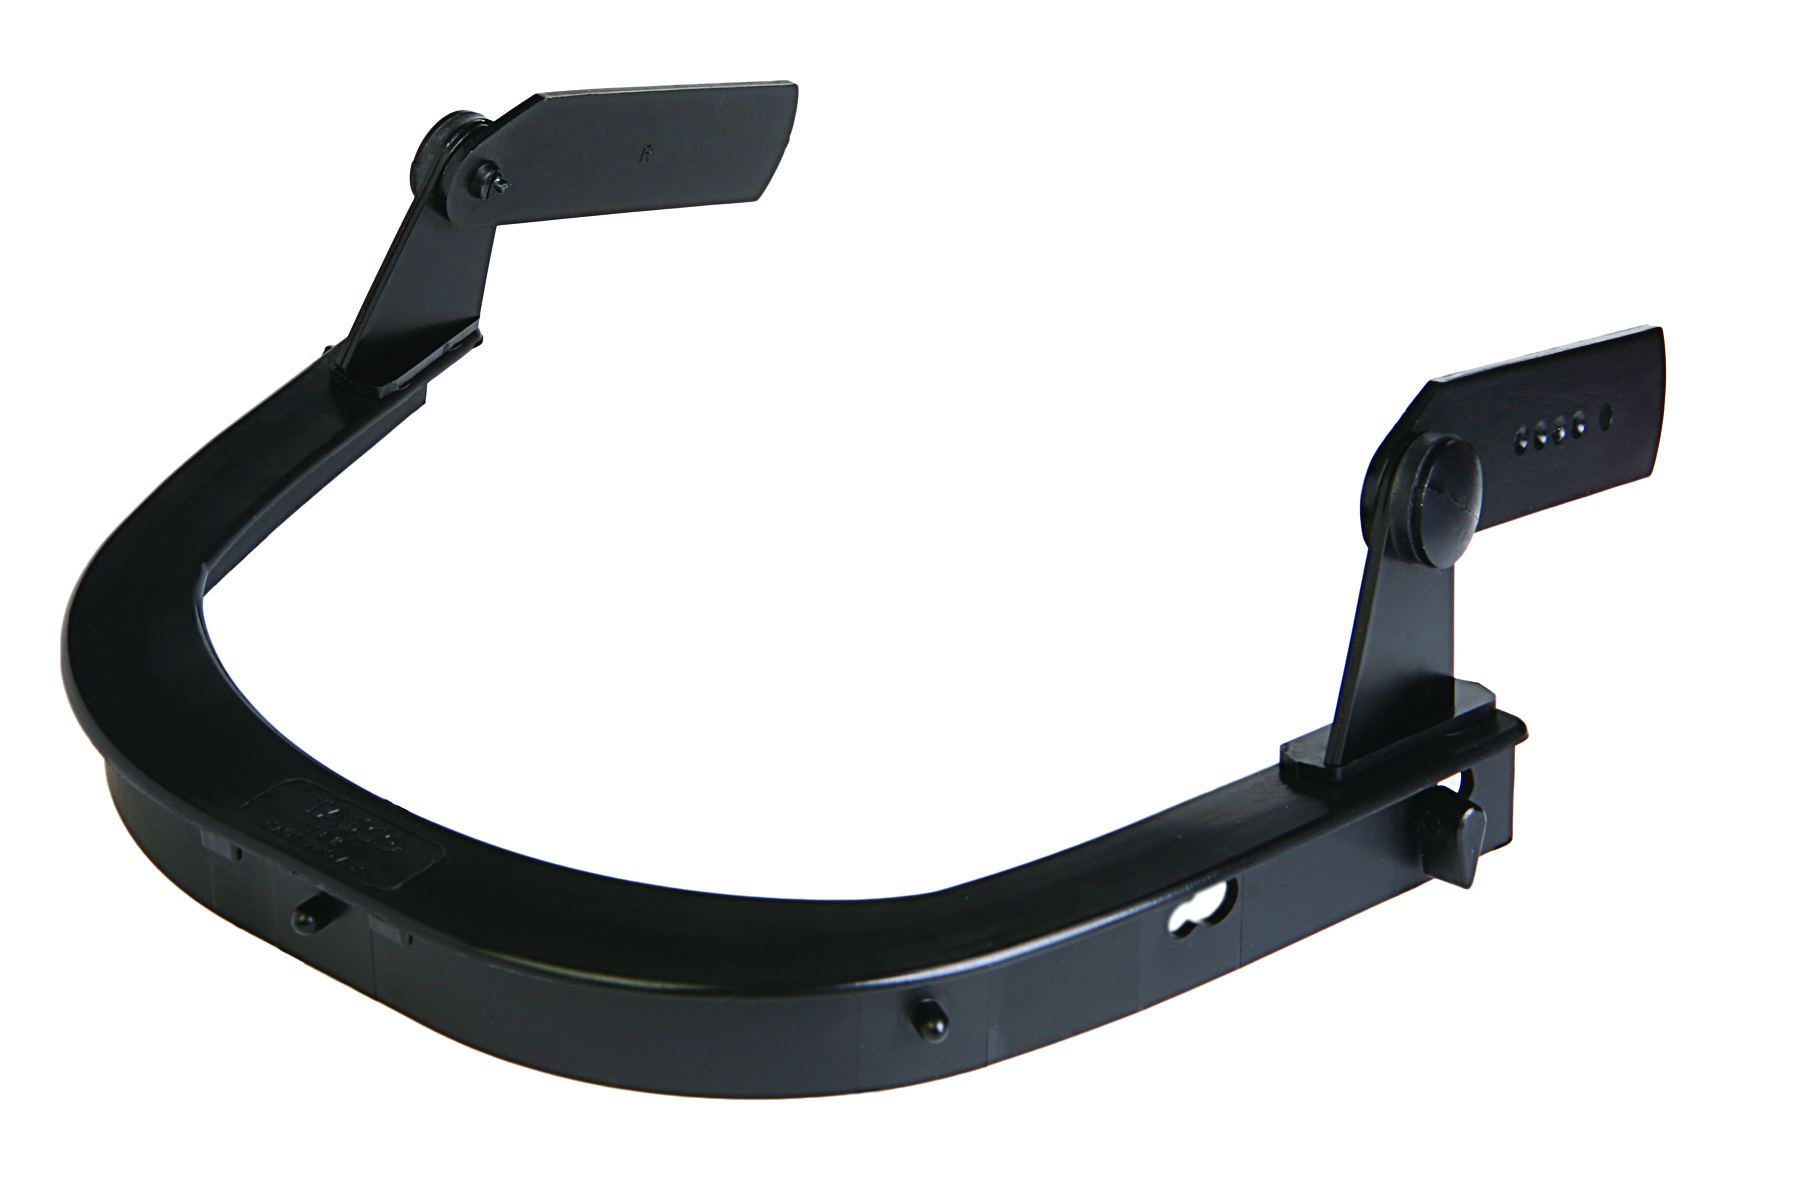 ERB 5000A Visor Carrier Attachment for Hardhats